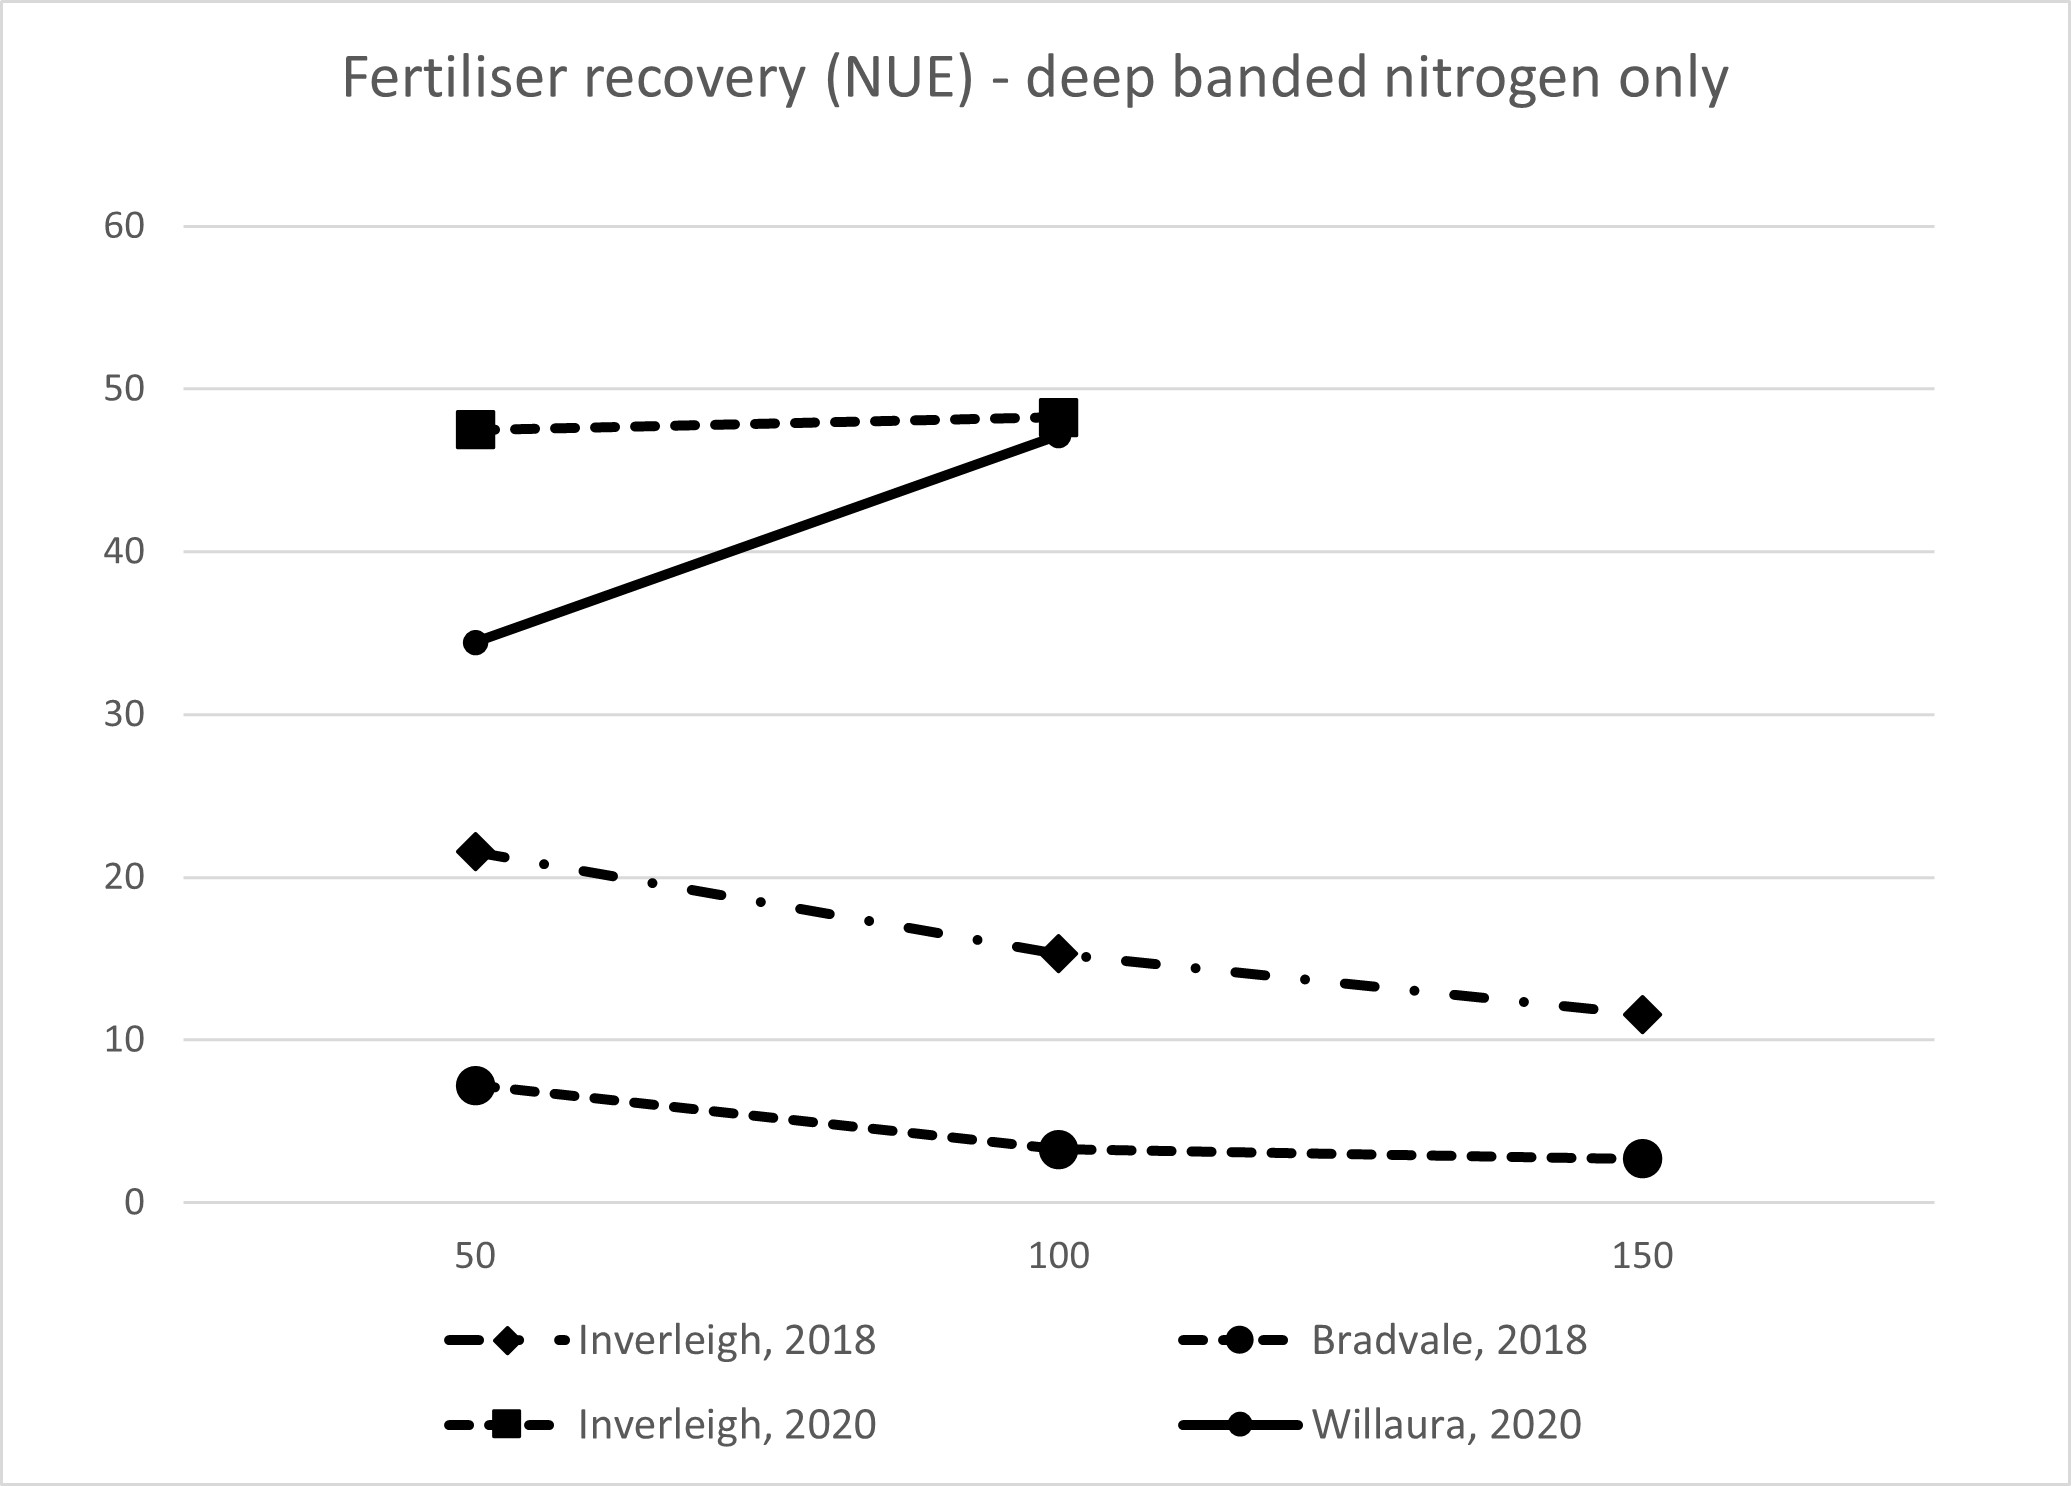 Figure 2. Fertiliser recovery, indicating nitrogen use efficiency, from deep banding nitrogen alone in 2018 and 2020.